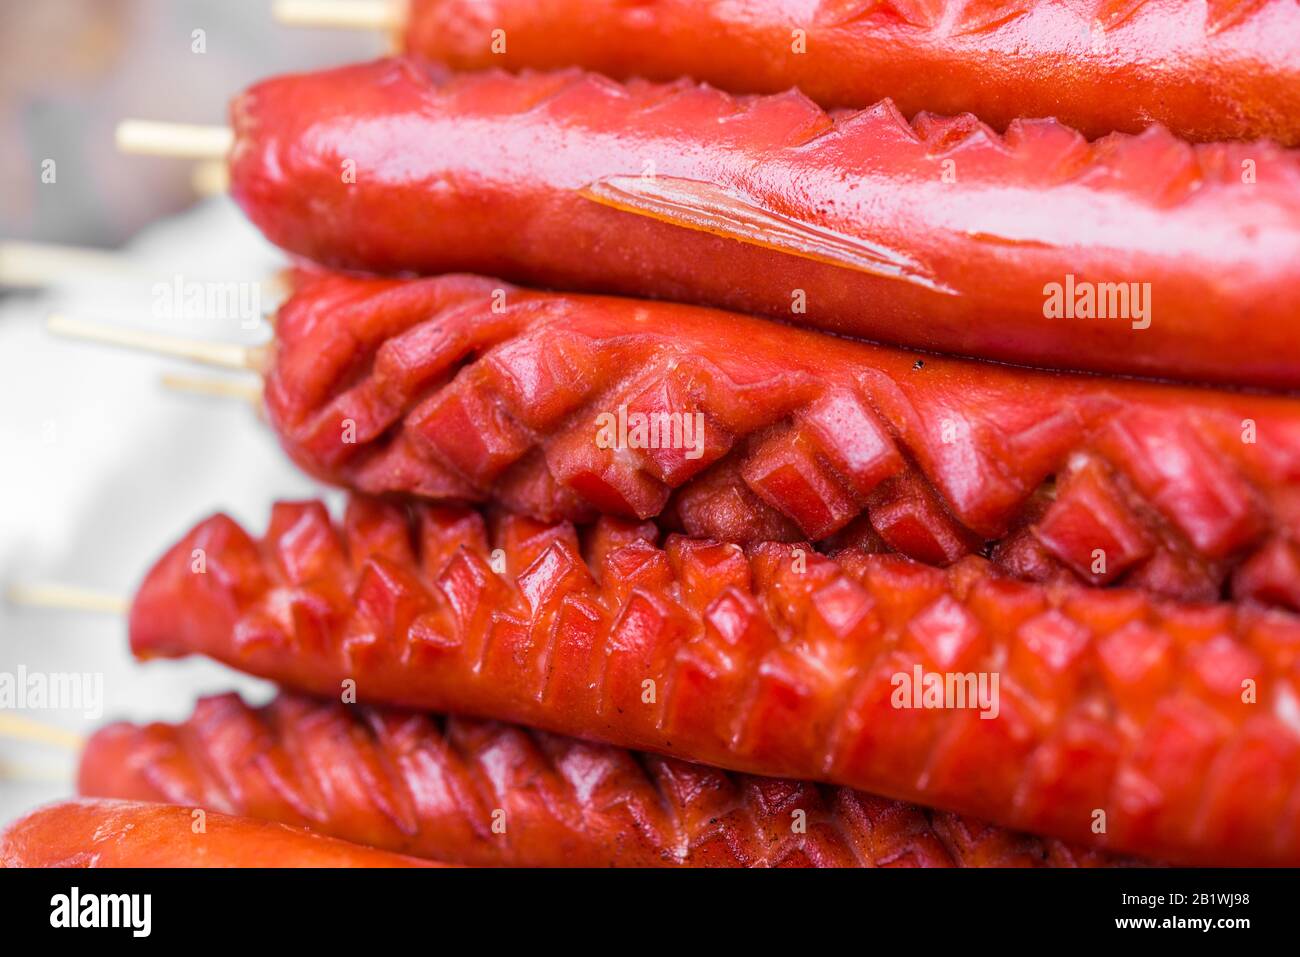 Grilled barbecued sausage hot dogs on a stick at a street food market. Stock Photo